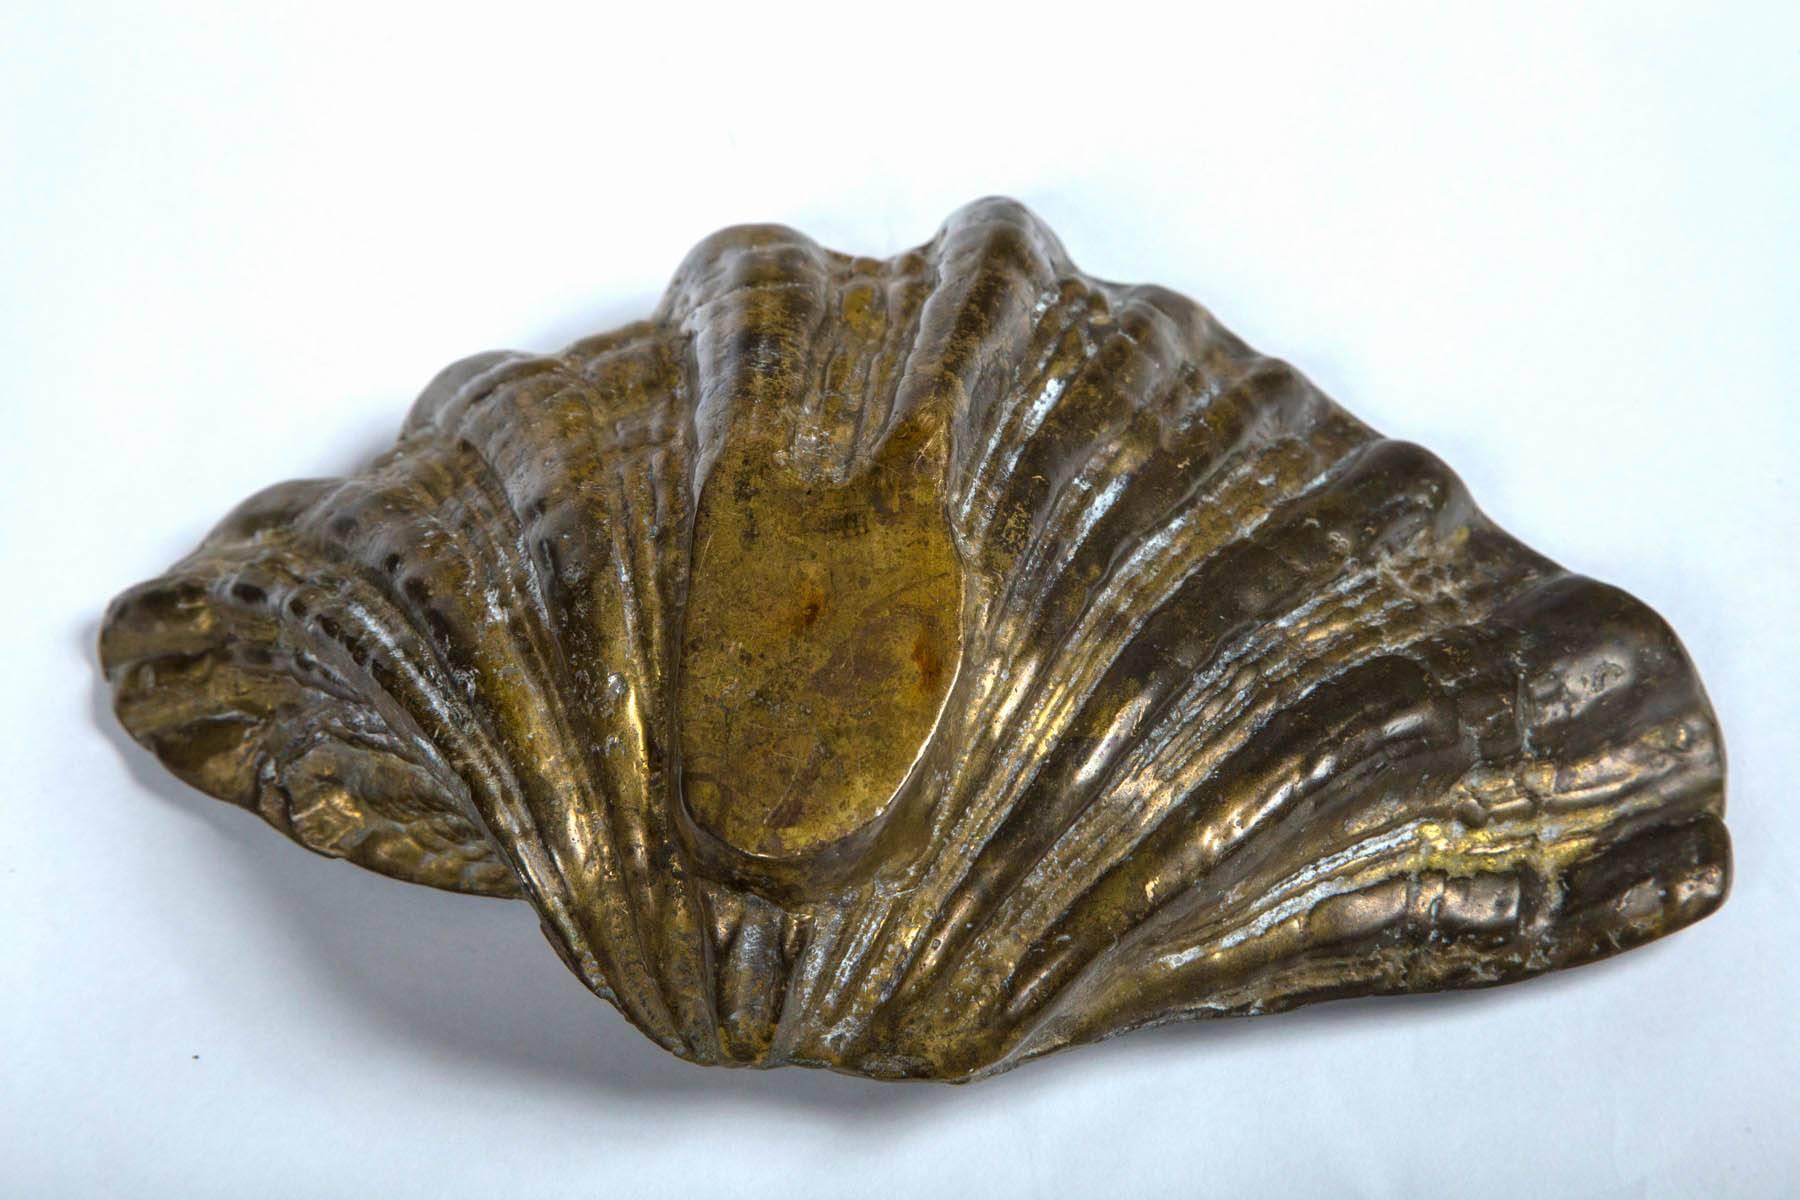 Antique continental bronze shell, circa 1920. Wonderfully detailed with aged finish.